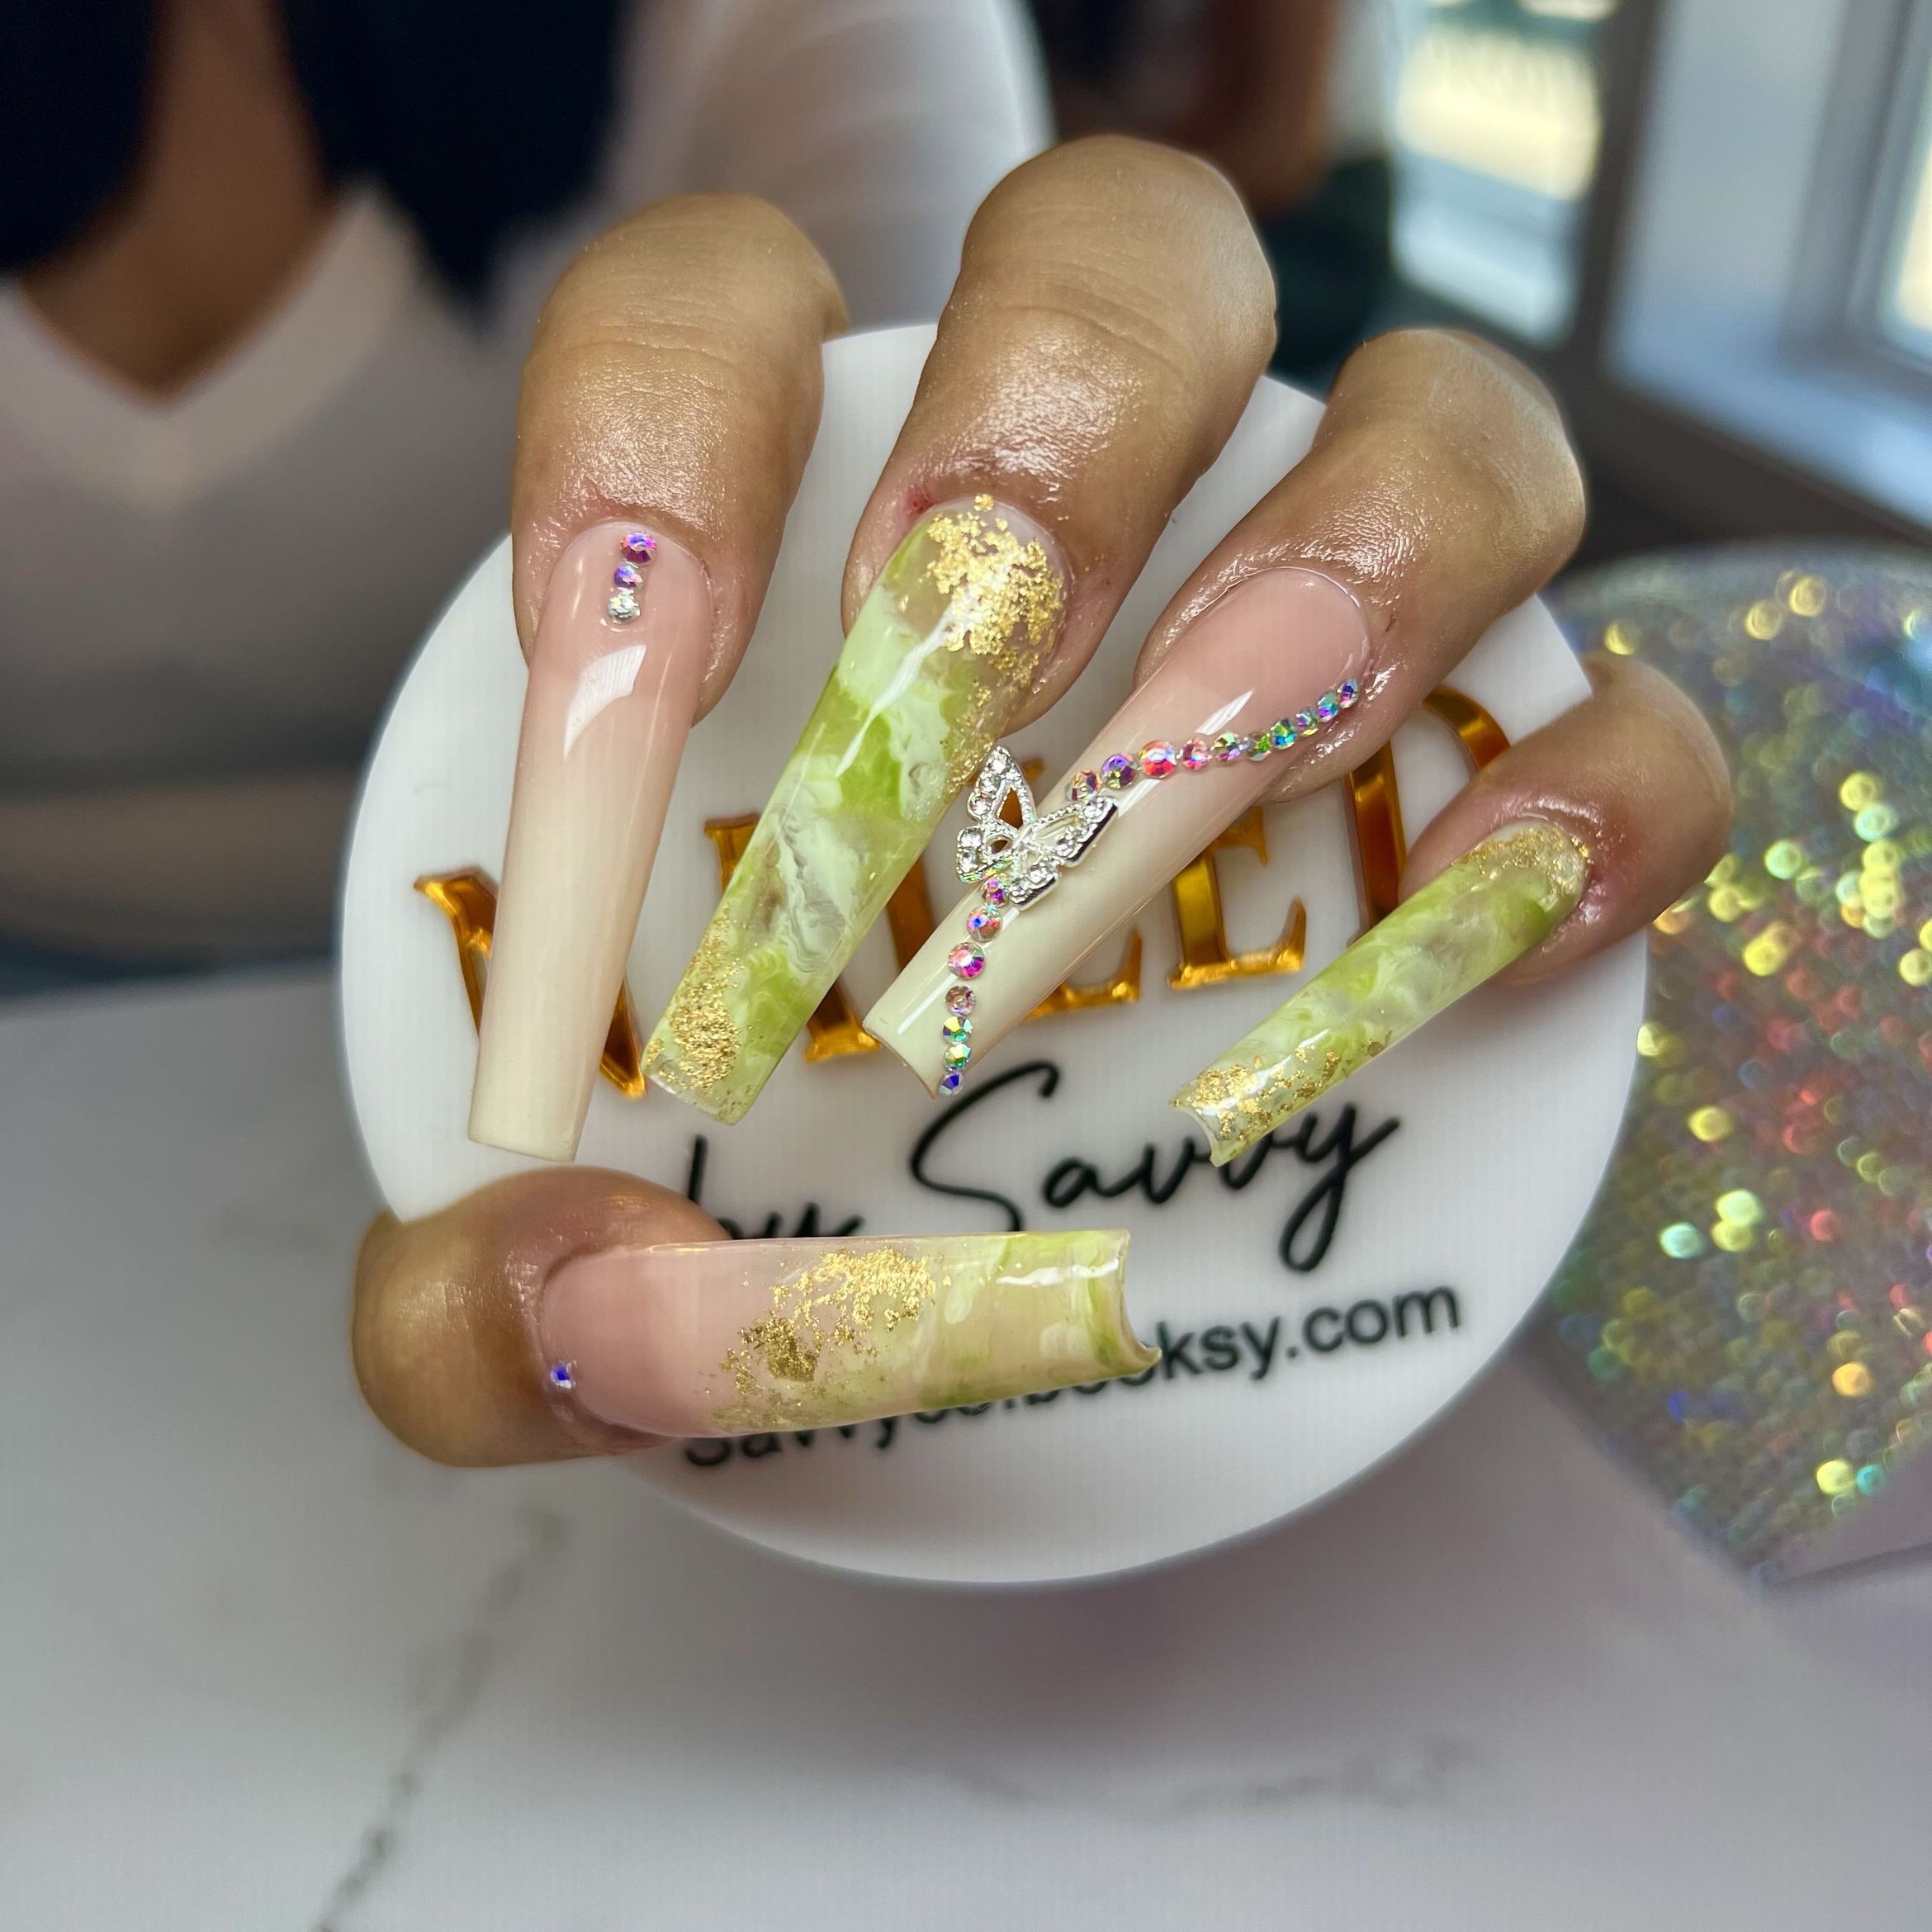 Savvy & Co - Nails By Savannah, 2001 N Main St, Suite A, Tarboro, 27886